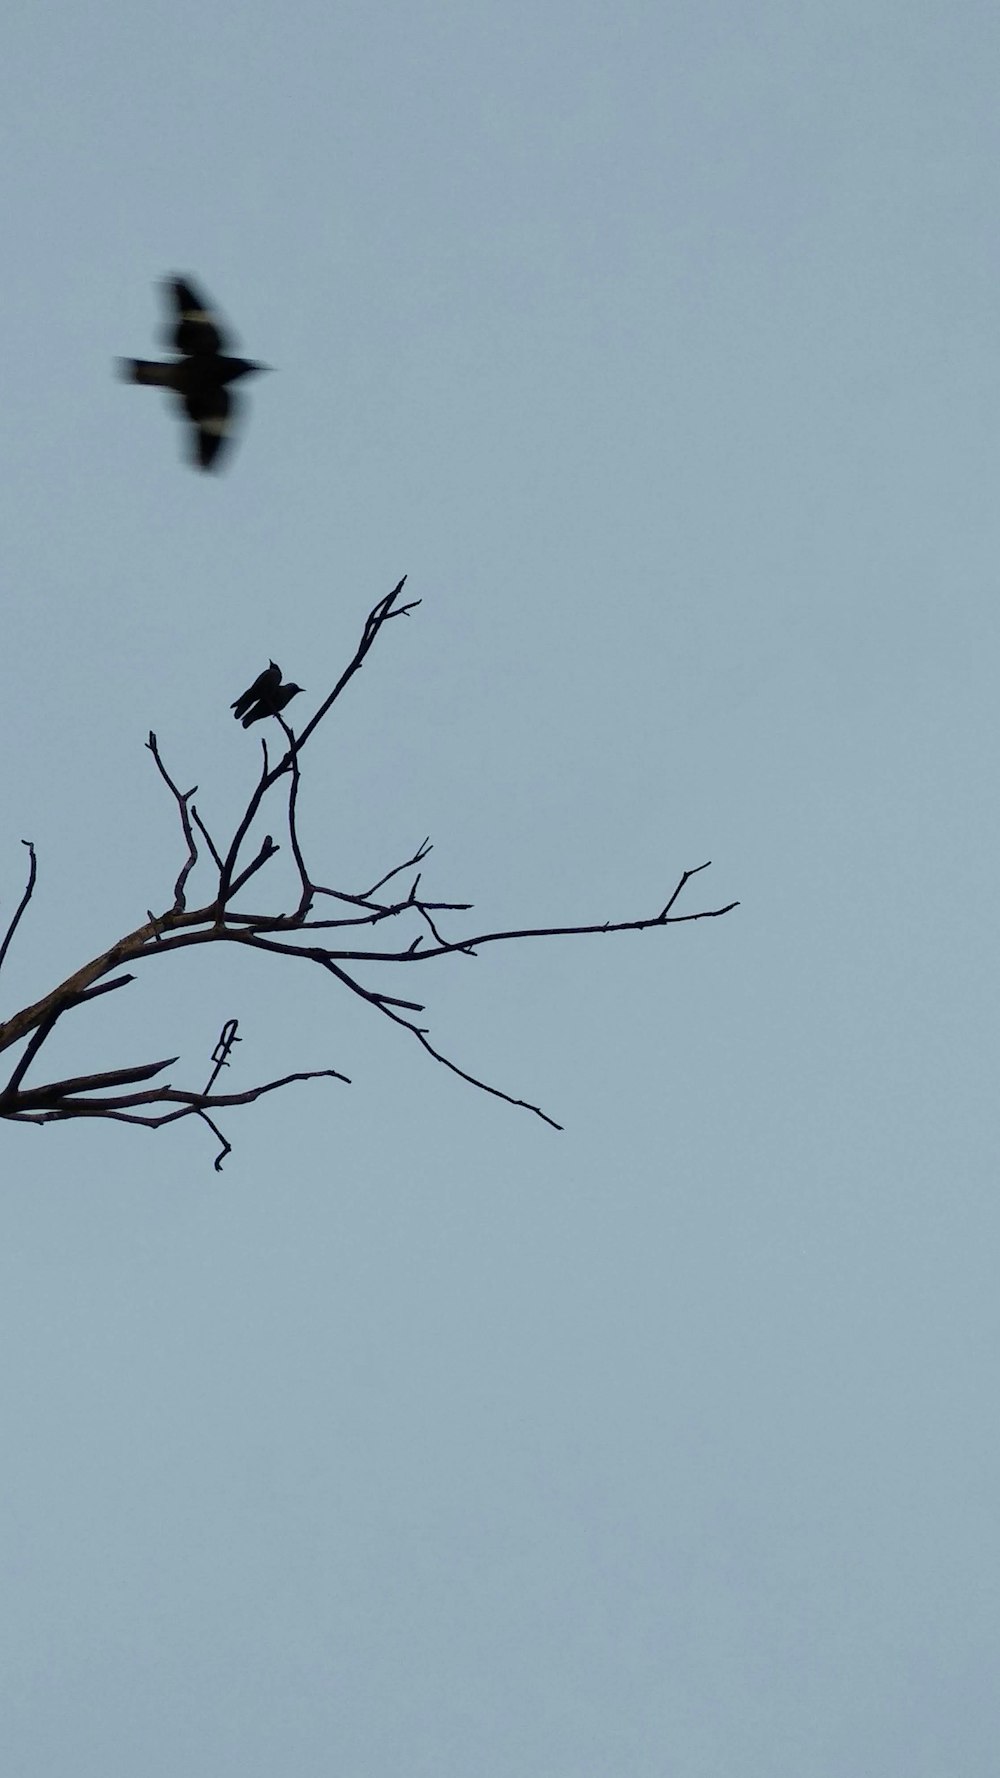 a bird flying over a bare tree branch